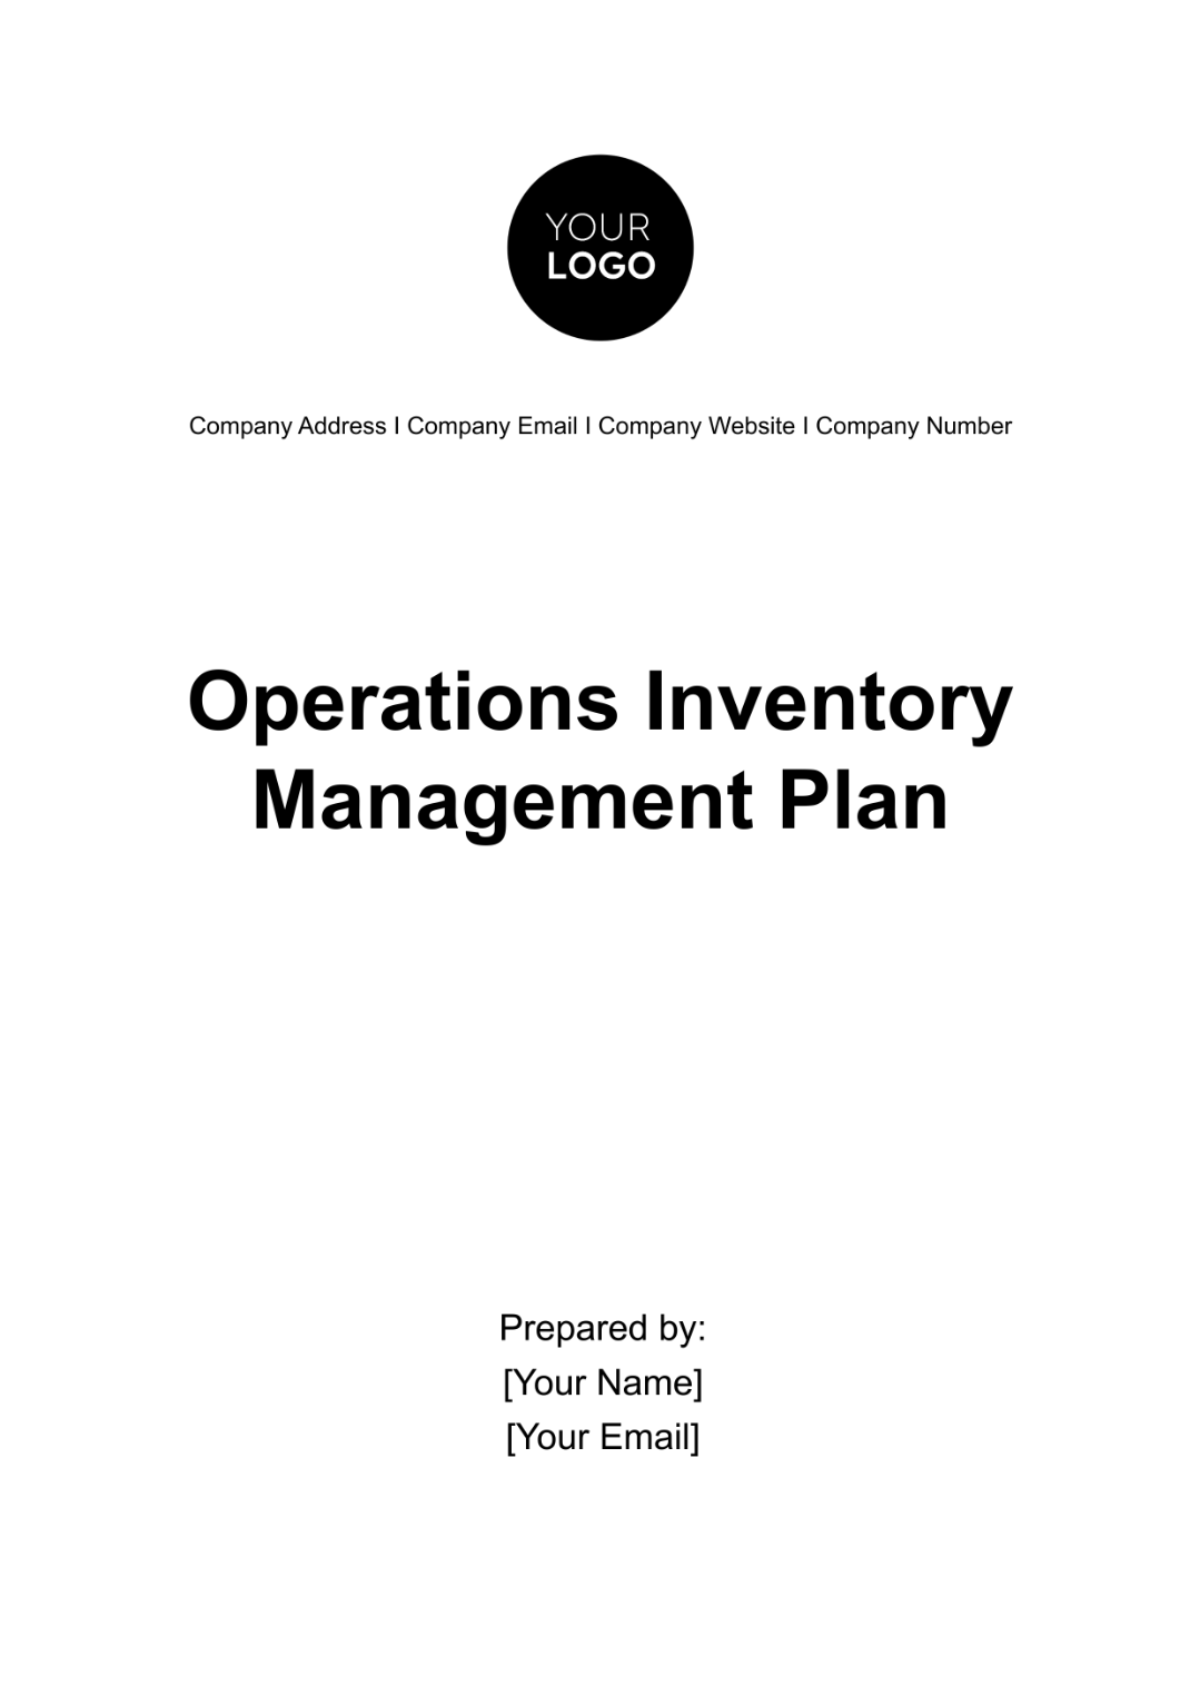 Operations Inventory Management Plan Template